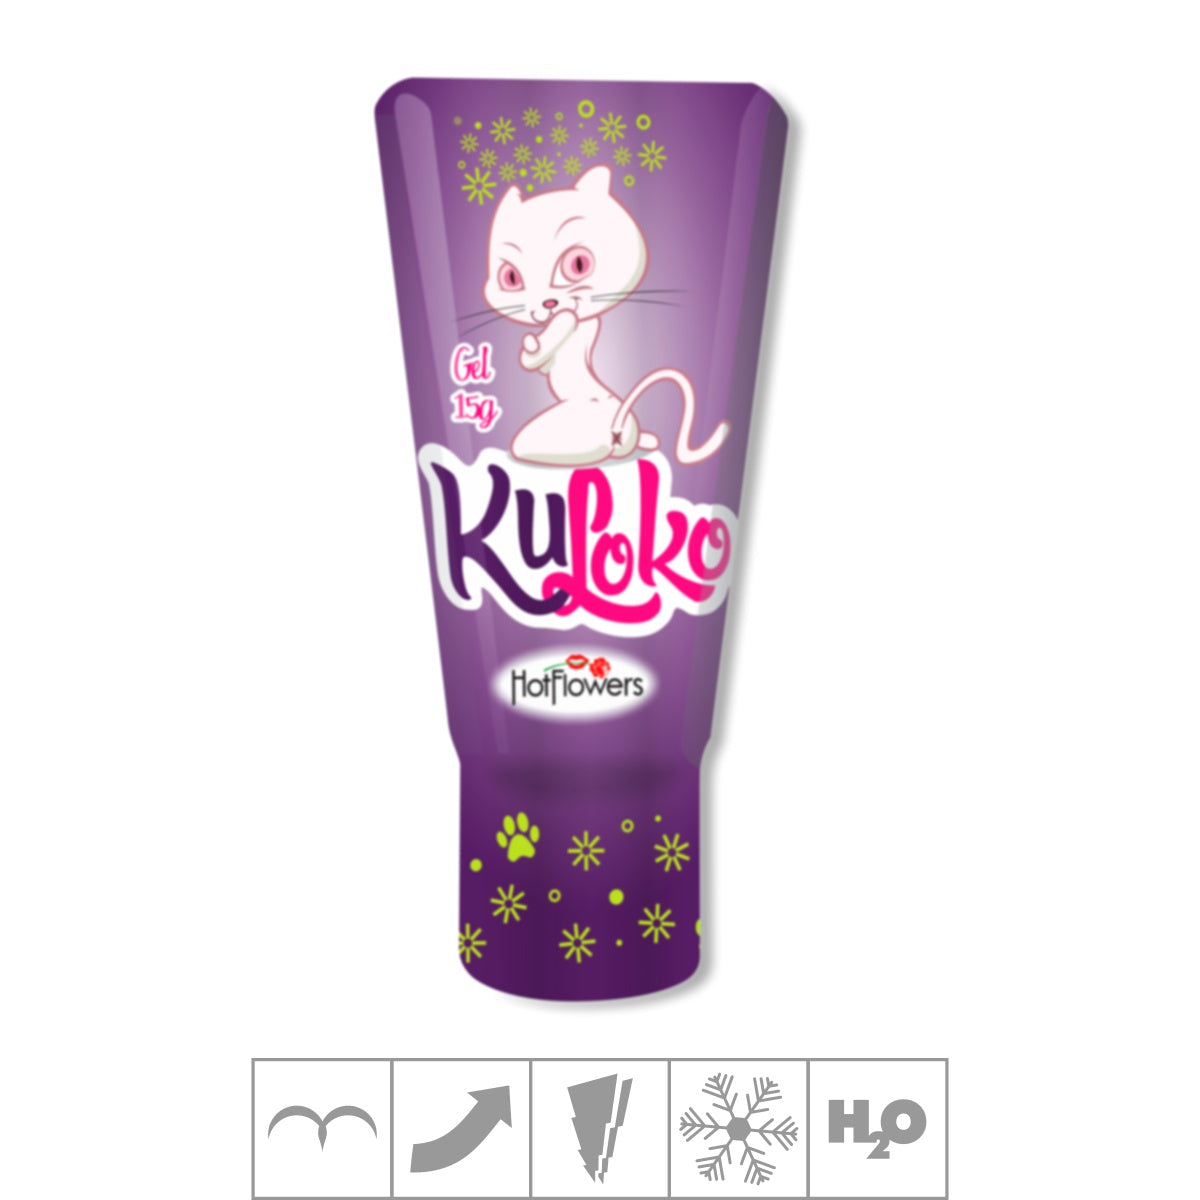 Kuloko - Gel excitant pour le sexe anal - 15g